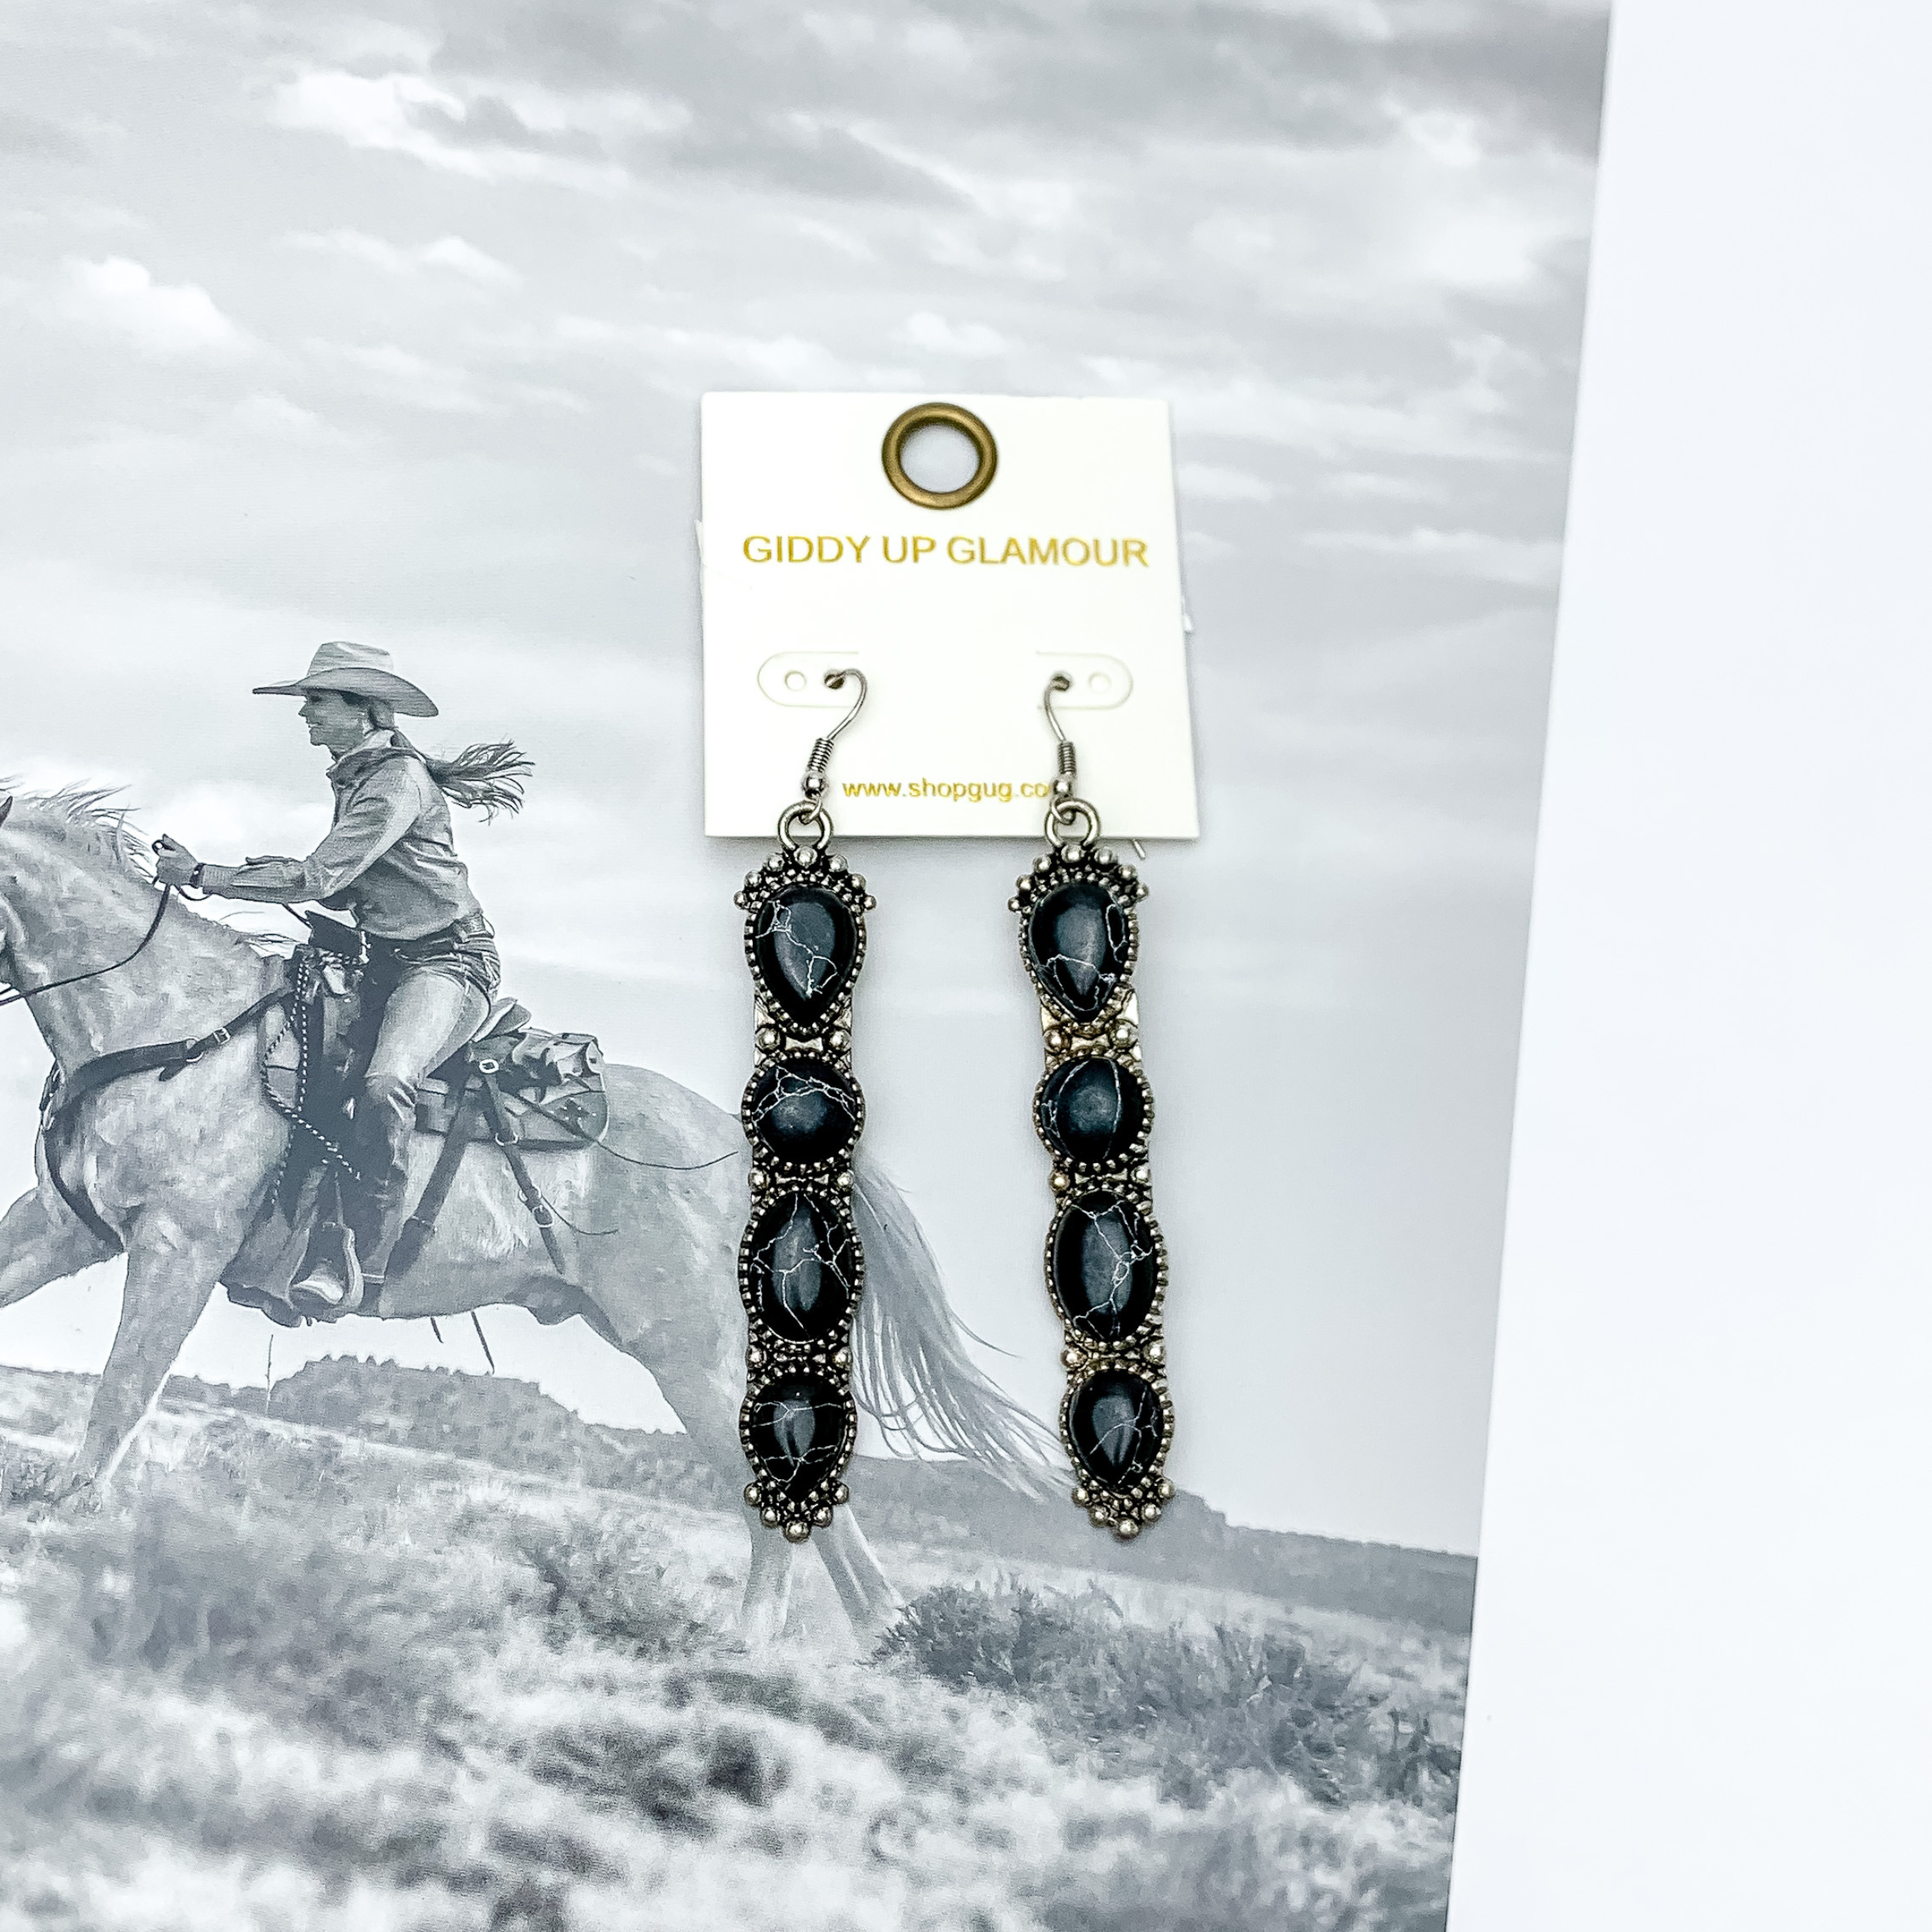 Western Connection Silver Tone Earrings With Four Stones in Red. Pictured with a western scene in the background.